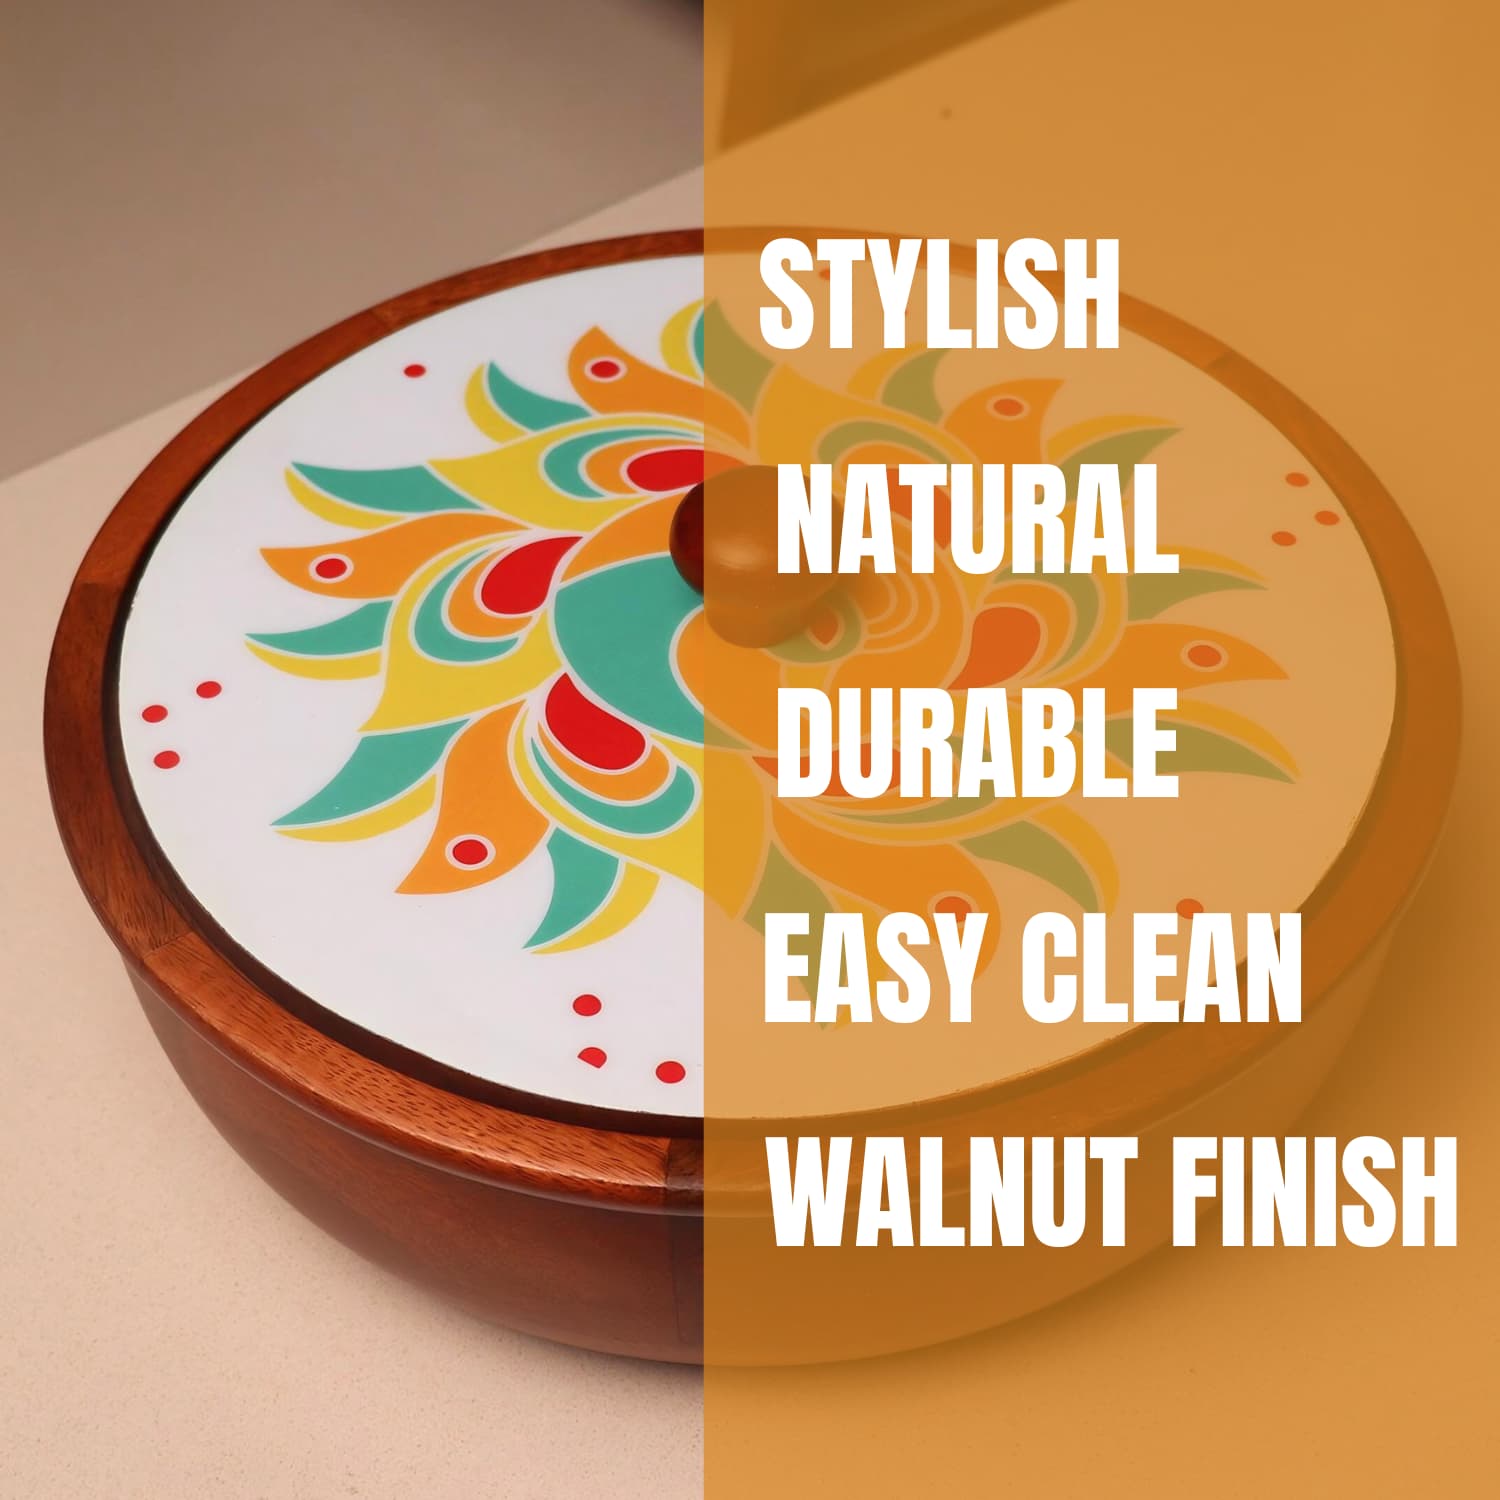 Best Wooden Chapati box online India Rangoli Edition features